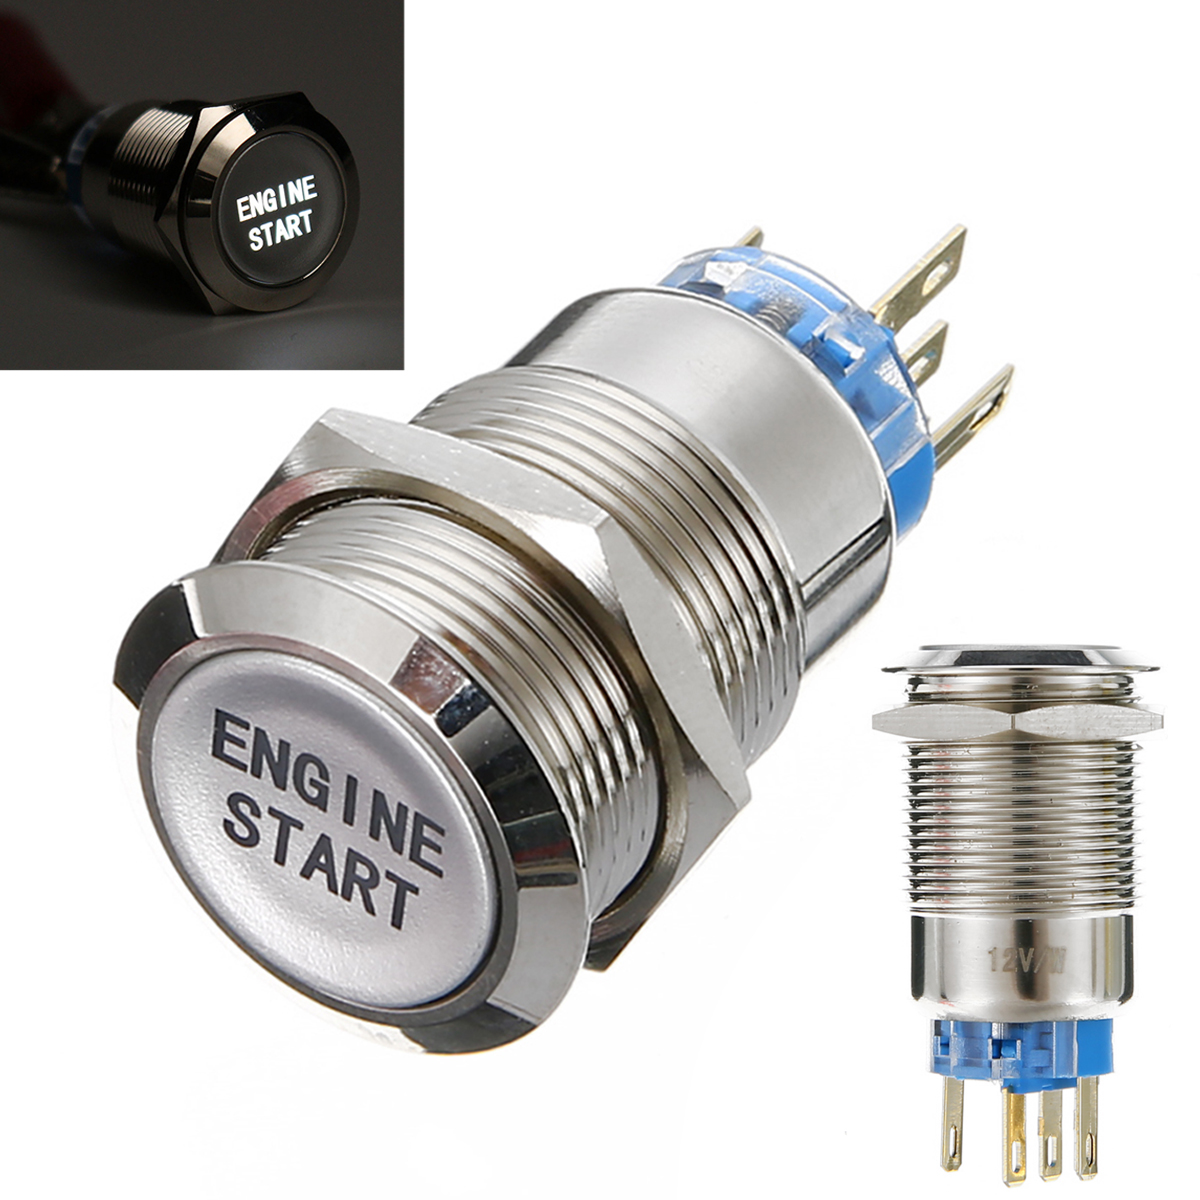 New 12V White LED Momentary Switch 19mm On/Off Button Waterproof Car Vehicle Metal Engine Start Push Button Switch Mayitr